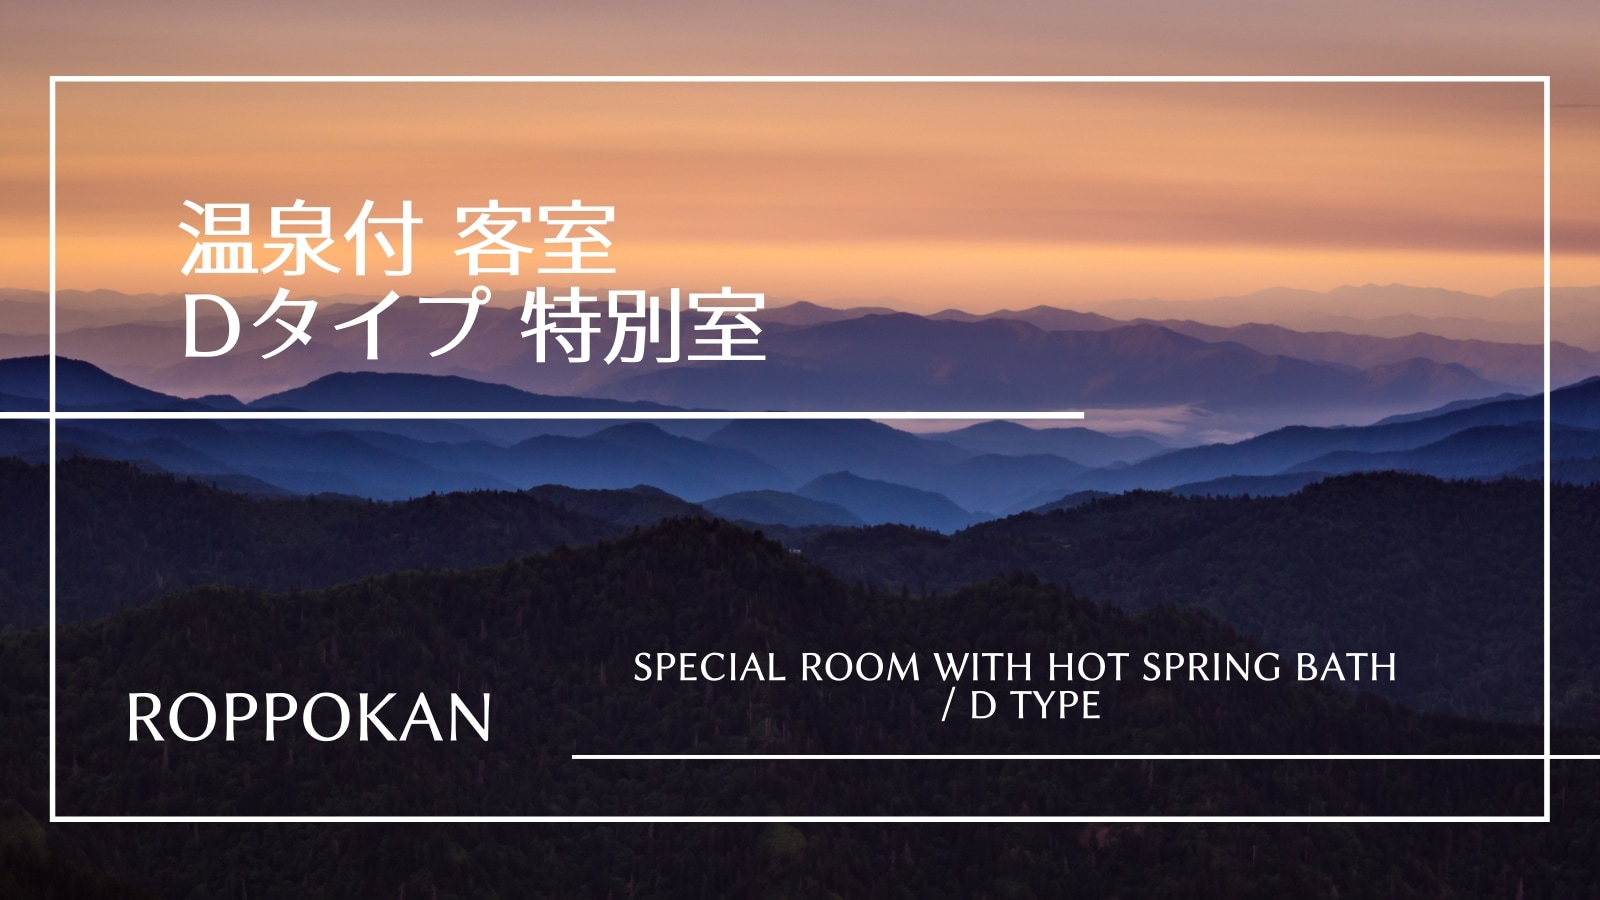 D type special room << Popular guest room with hot spring >> There are 3 types of guest rooms in total.